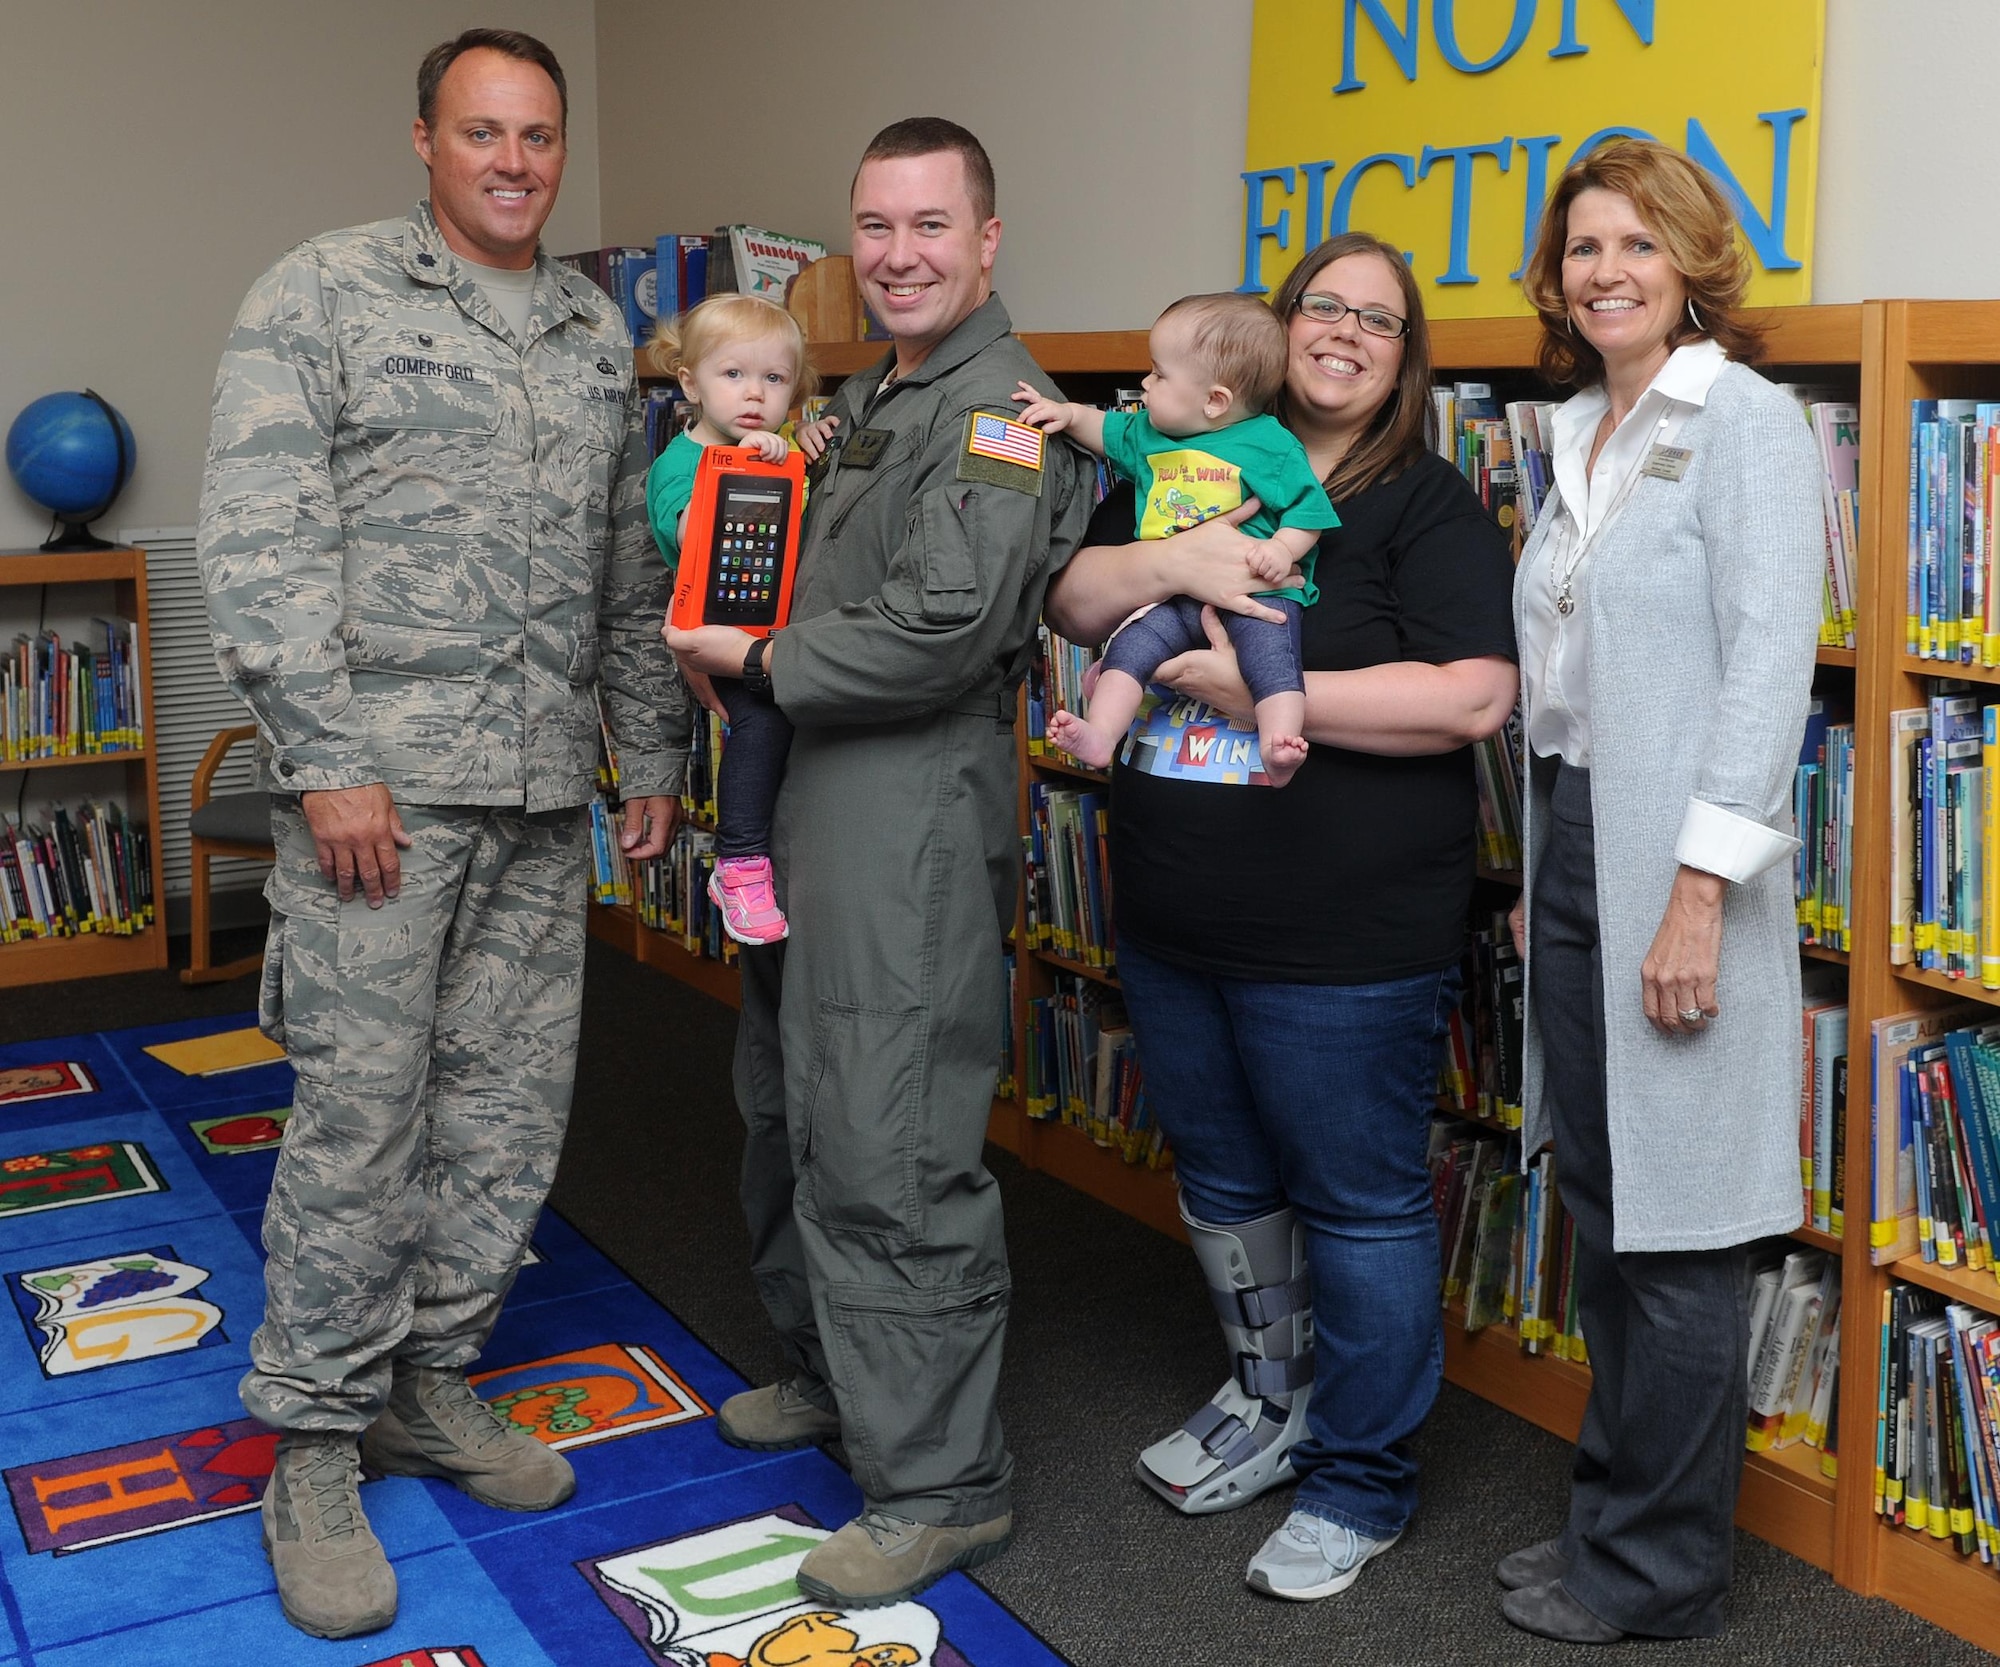 Lt. Col. Lee Comerford, left, the commander of the 1st Special Operations Force Support Squadron, poses for a group photo with the Andersen Family at Hurlburt Field, Fla., Oct. 17, 2016. Comerford presented Cassidy Andersen, left, age two, an electronic reader for placing third in her age group at the Air Force level during the 2016 Department of Defense – Morale, Welfare and Recreation Summer Reading Program. (U.S. Air Force photo by Staff Sgt. Kentavist P. Brackin)